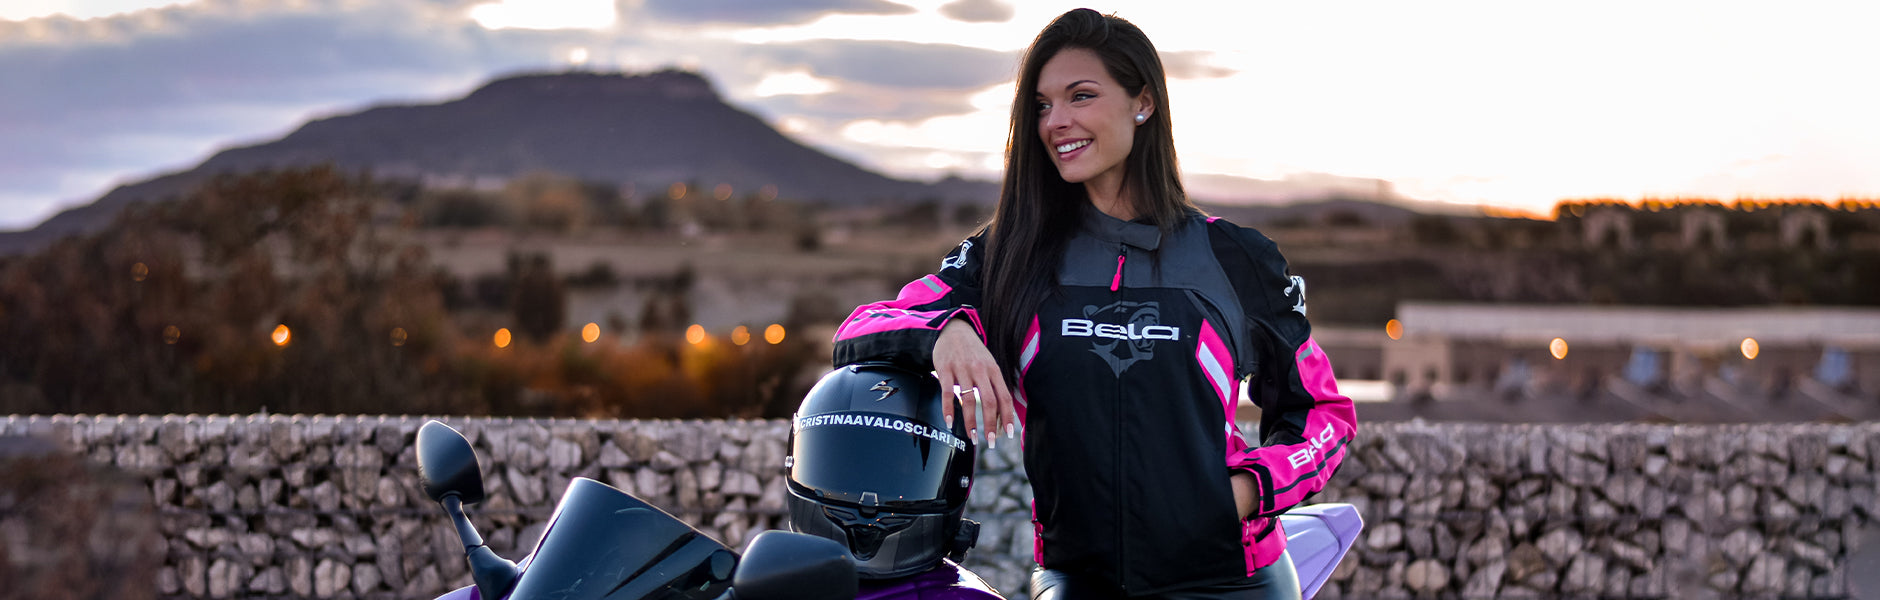 Collection of motorcycle gear for women